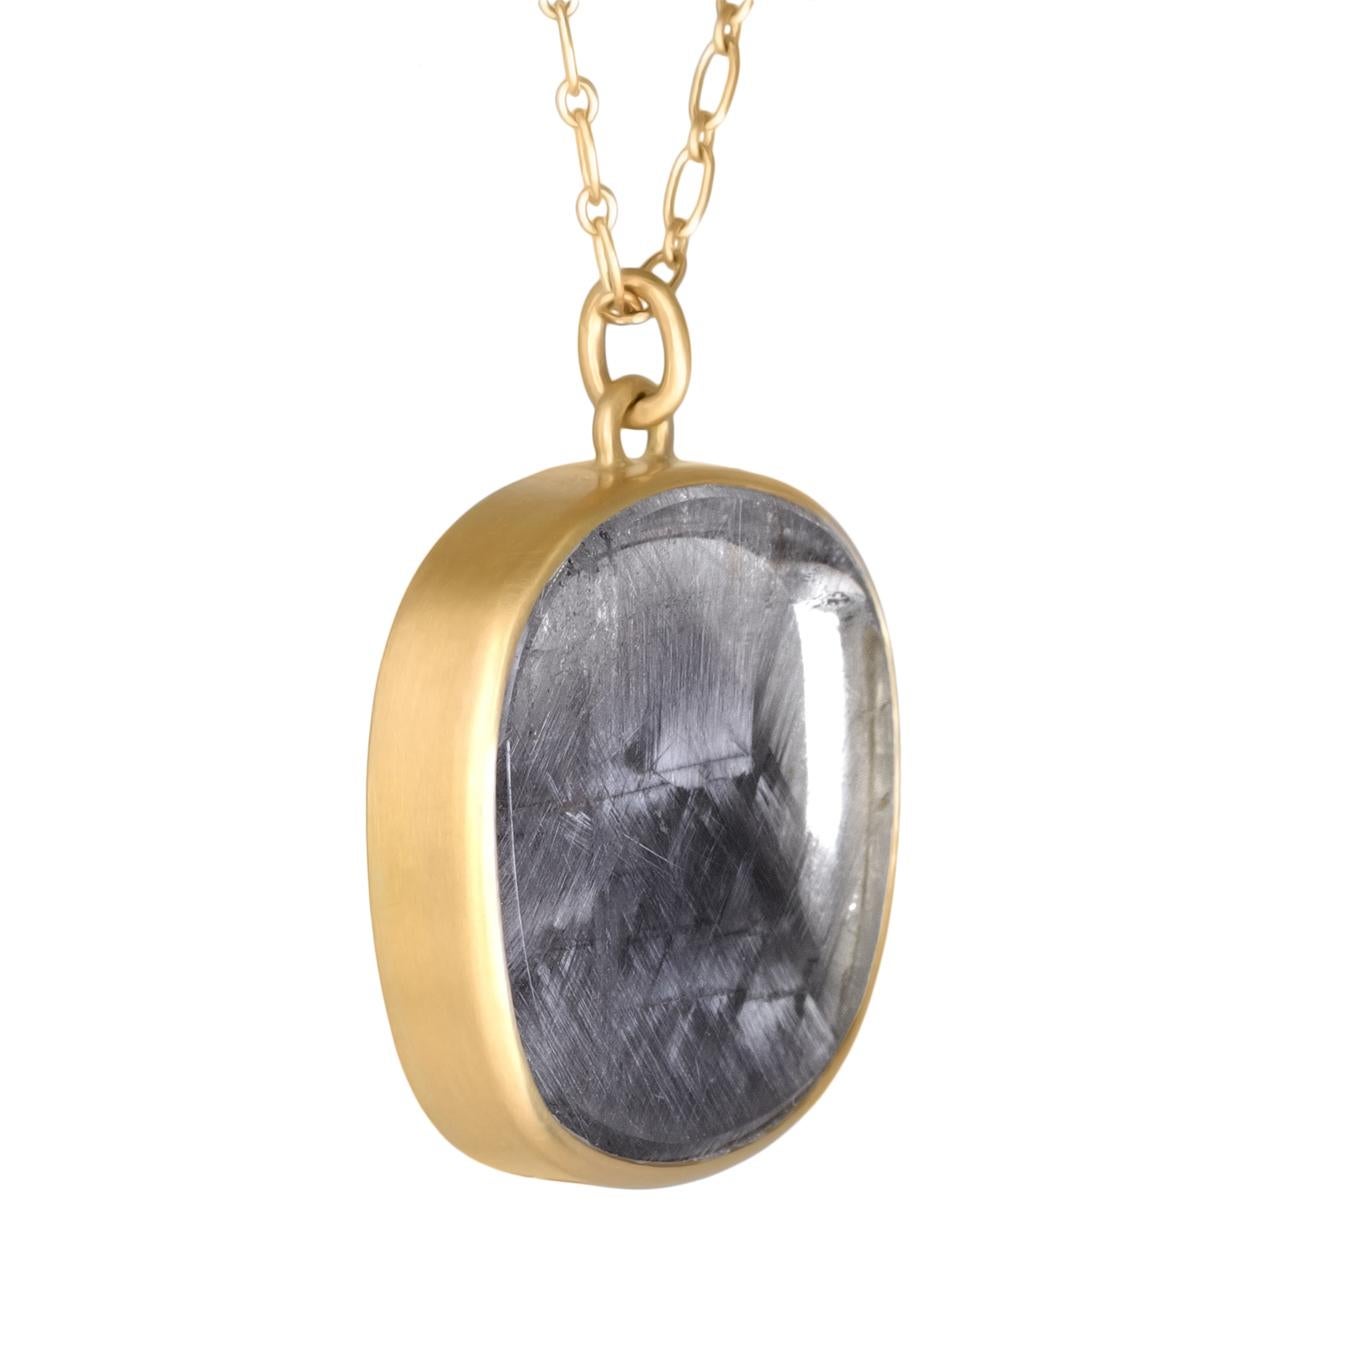 One of a kind necklace hand-fabricated by master jewelry maker Lola Brooks in the artist's signature-finished 18k yellow gold showcasing a shimmering three-dimensional 19.09 carat platinum rutilated quartz drop connected by handmade jump ring and